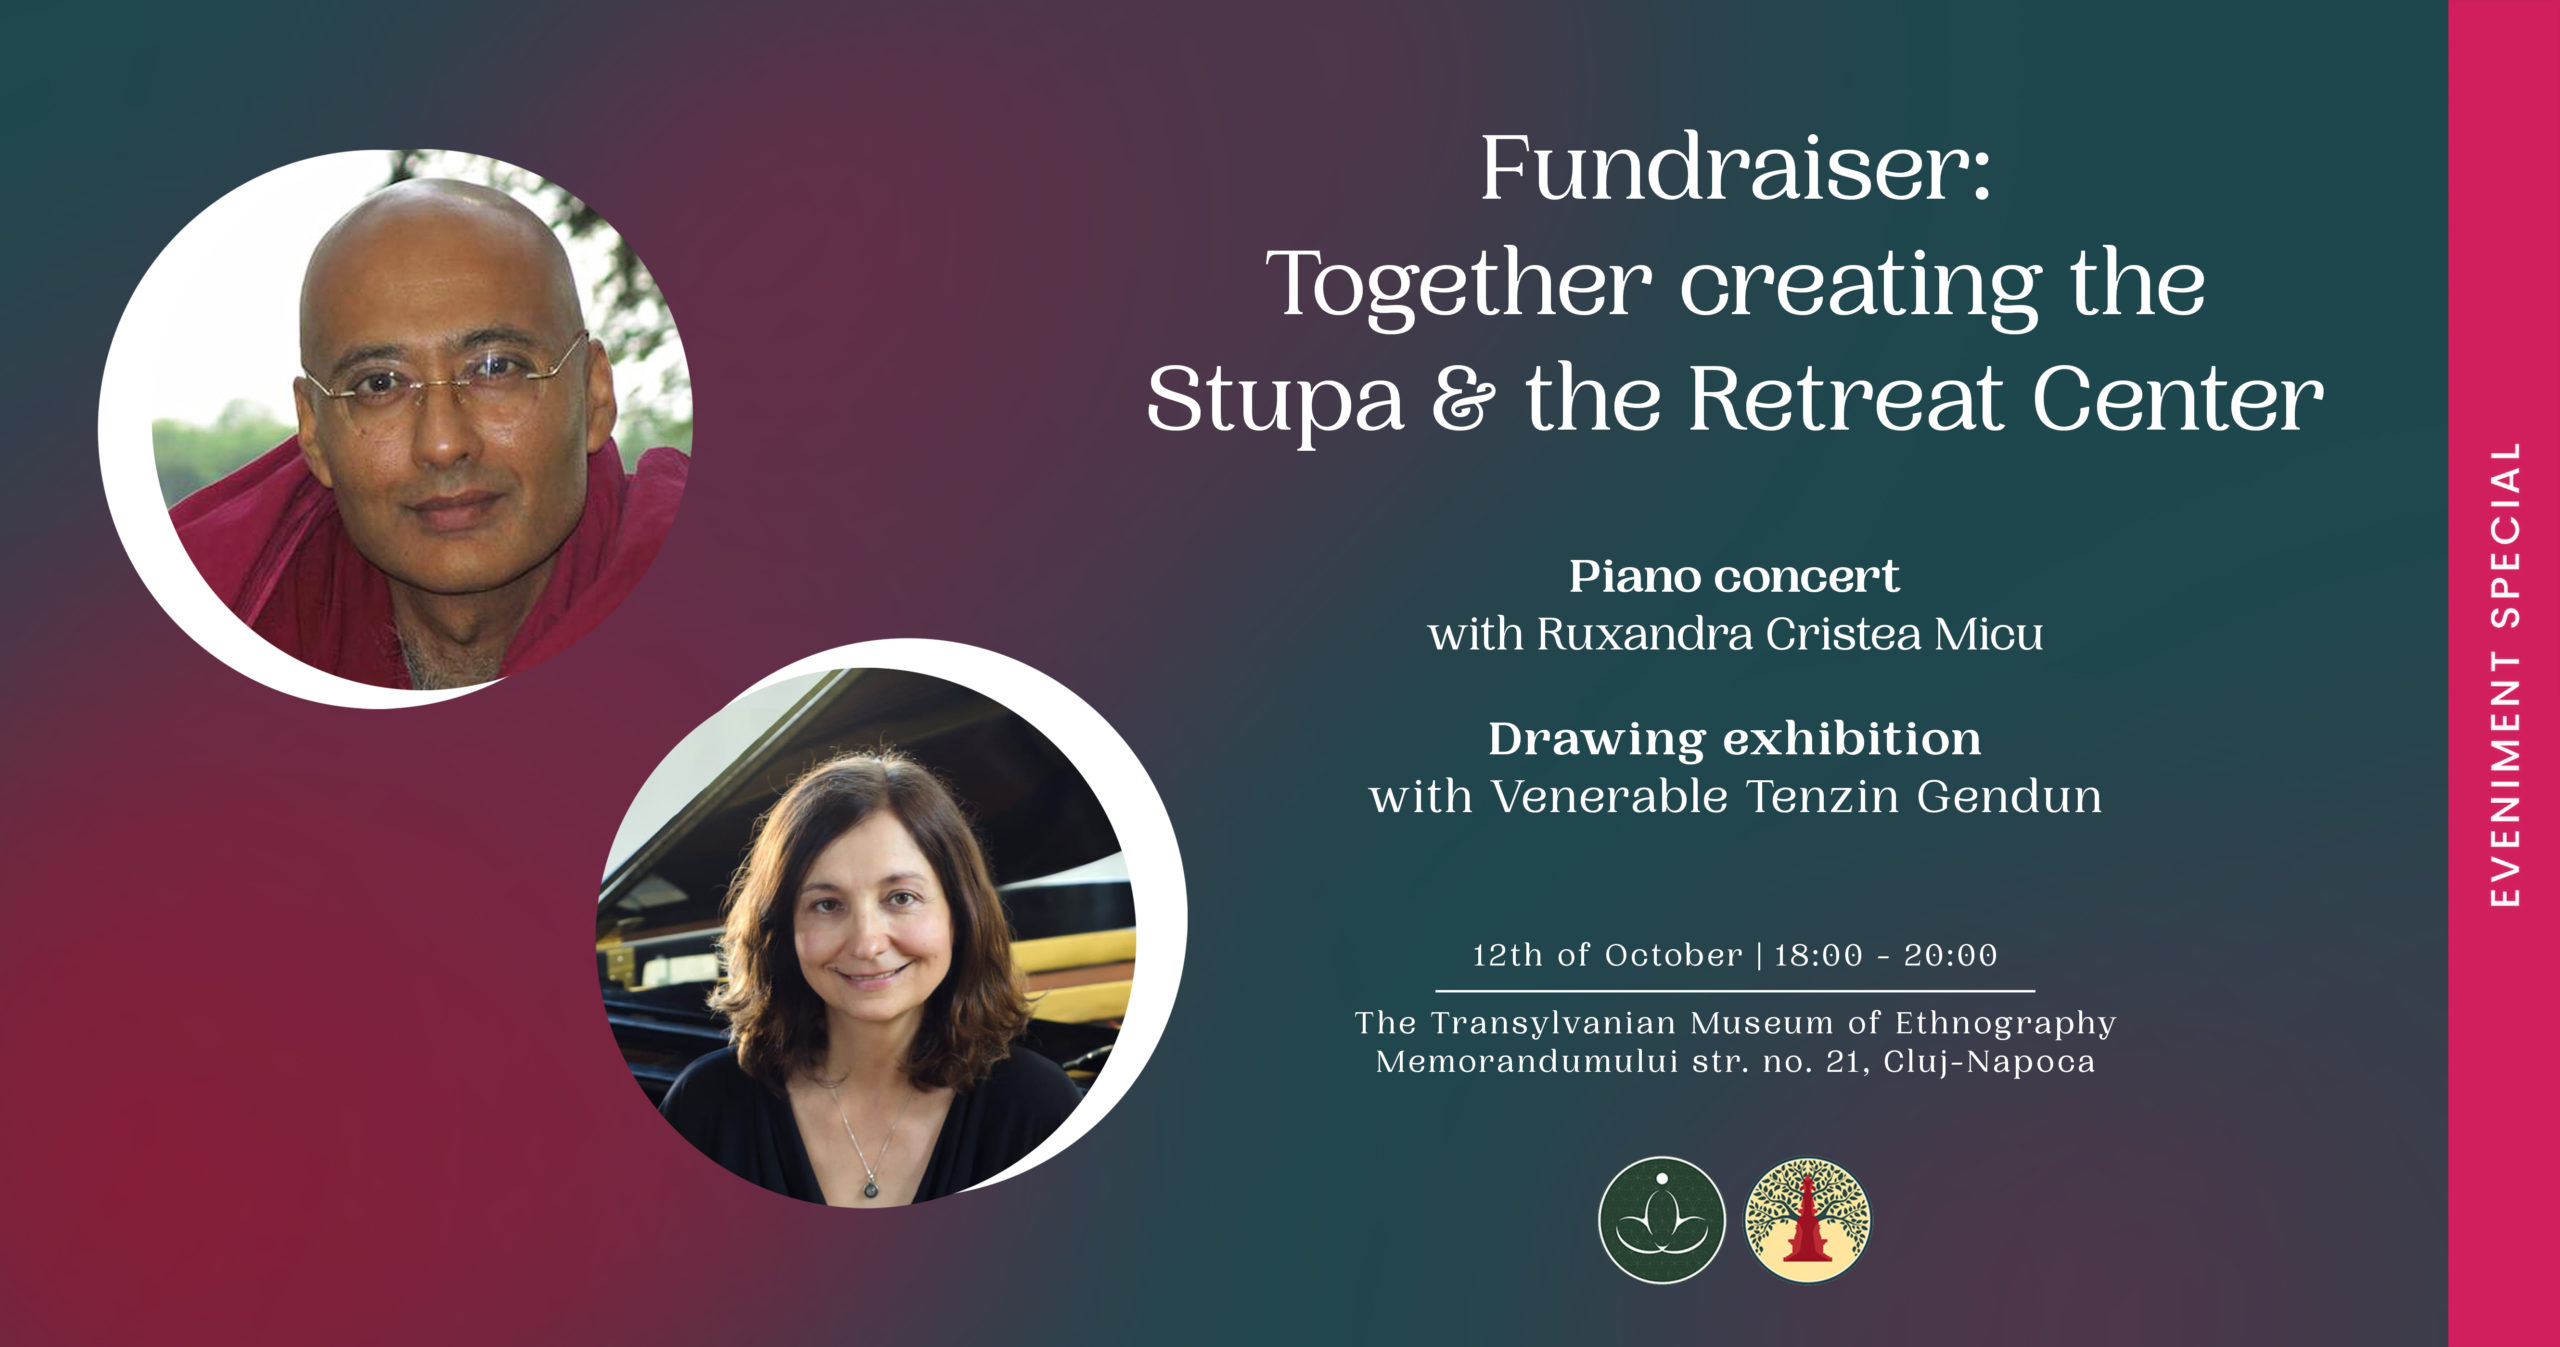 FUNDRAISER: Together crating the Stupa and the Retreat Center